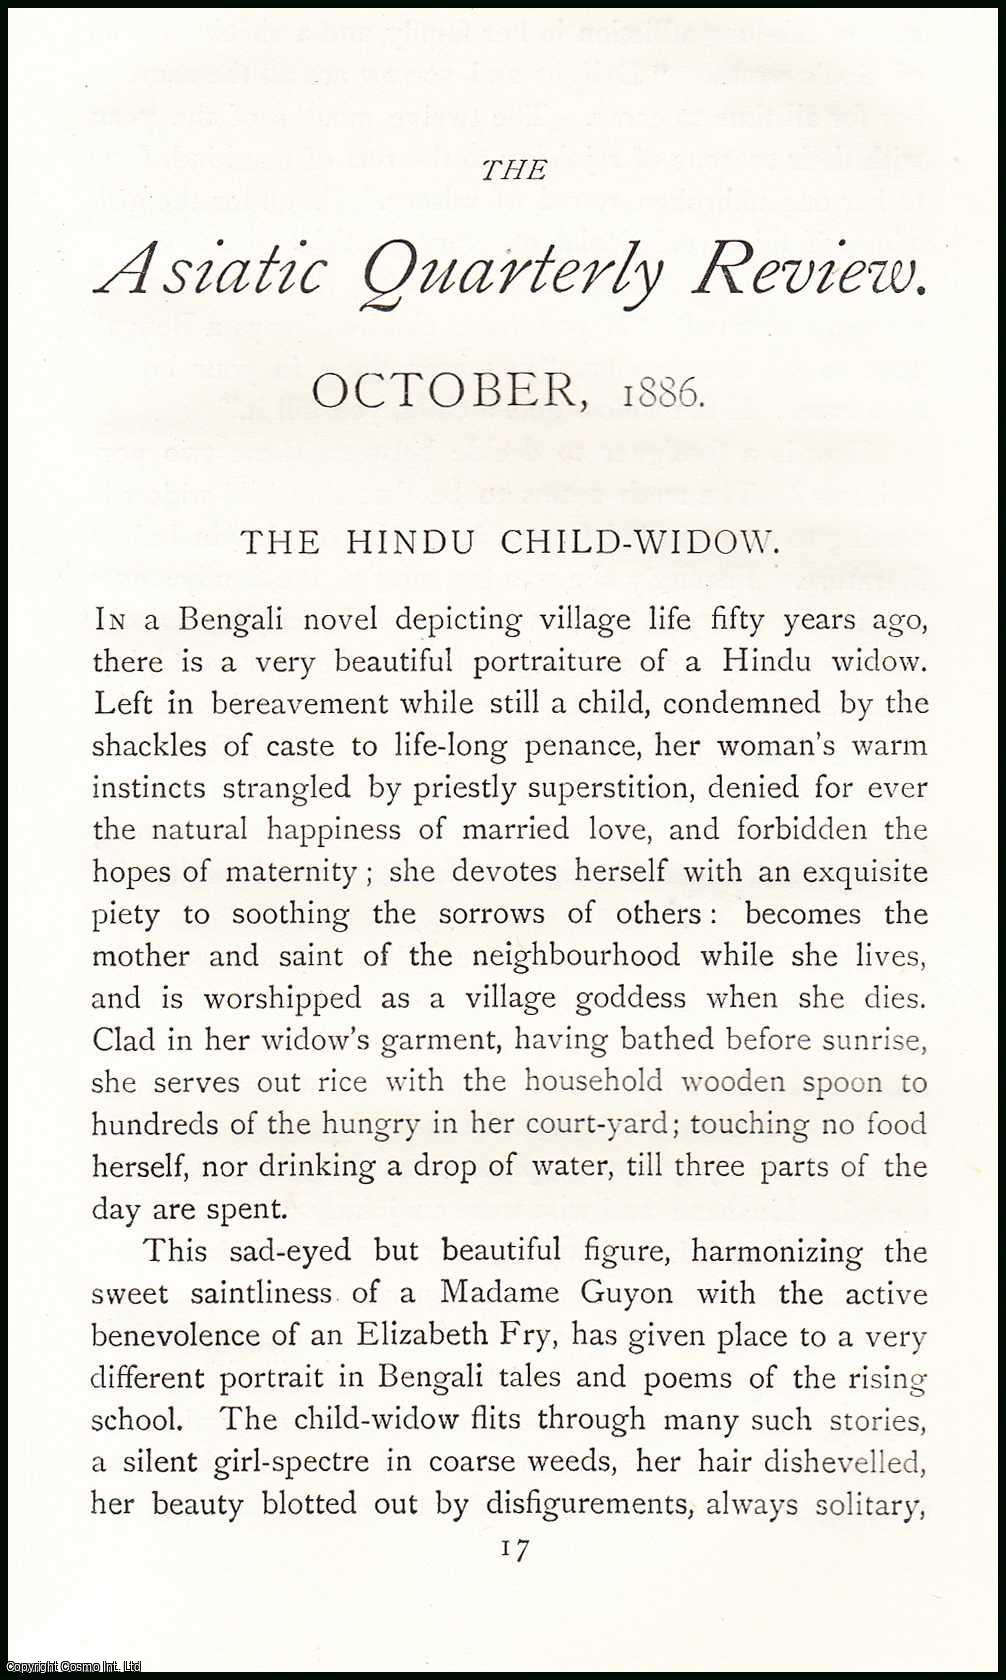 W.W. Hunter - The Hindu Child-Widow : in a Bengali novel depicting village life fifty years ago, there is a very beautiful portraiture of a Hindu Widow. Left in bereavement while still a child, condemned by the shackles of caste to life-long penance, her woman's warm instincts. An uncommon original article from The Asiatic Quarterly Review, 1886.